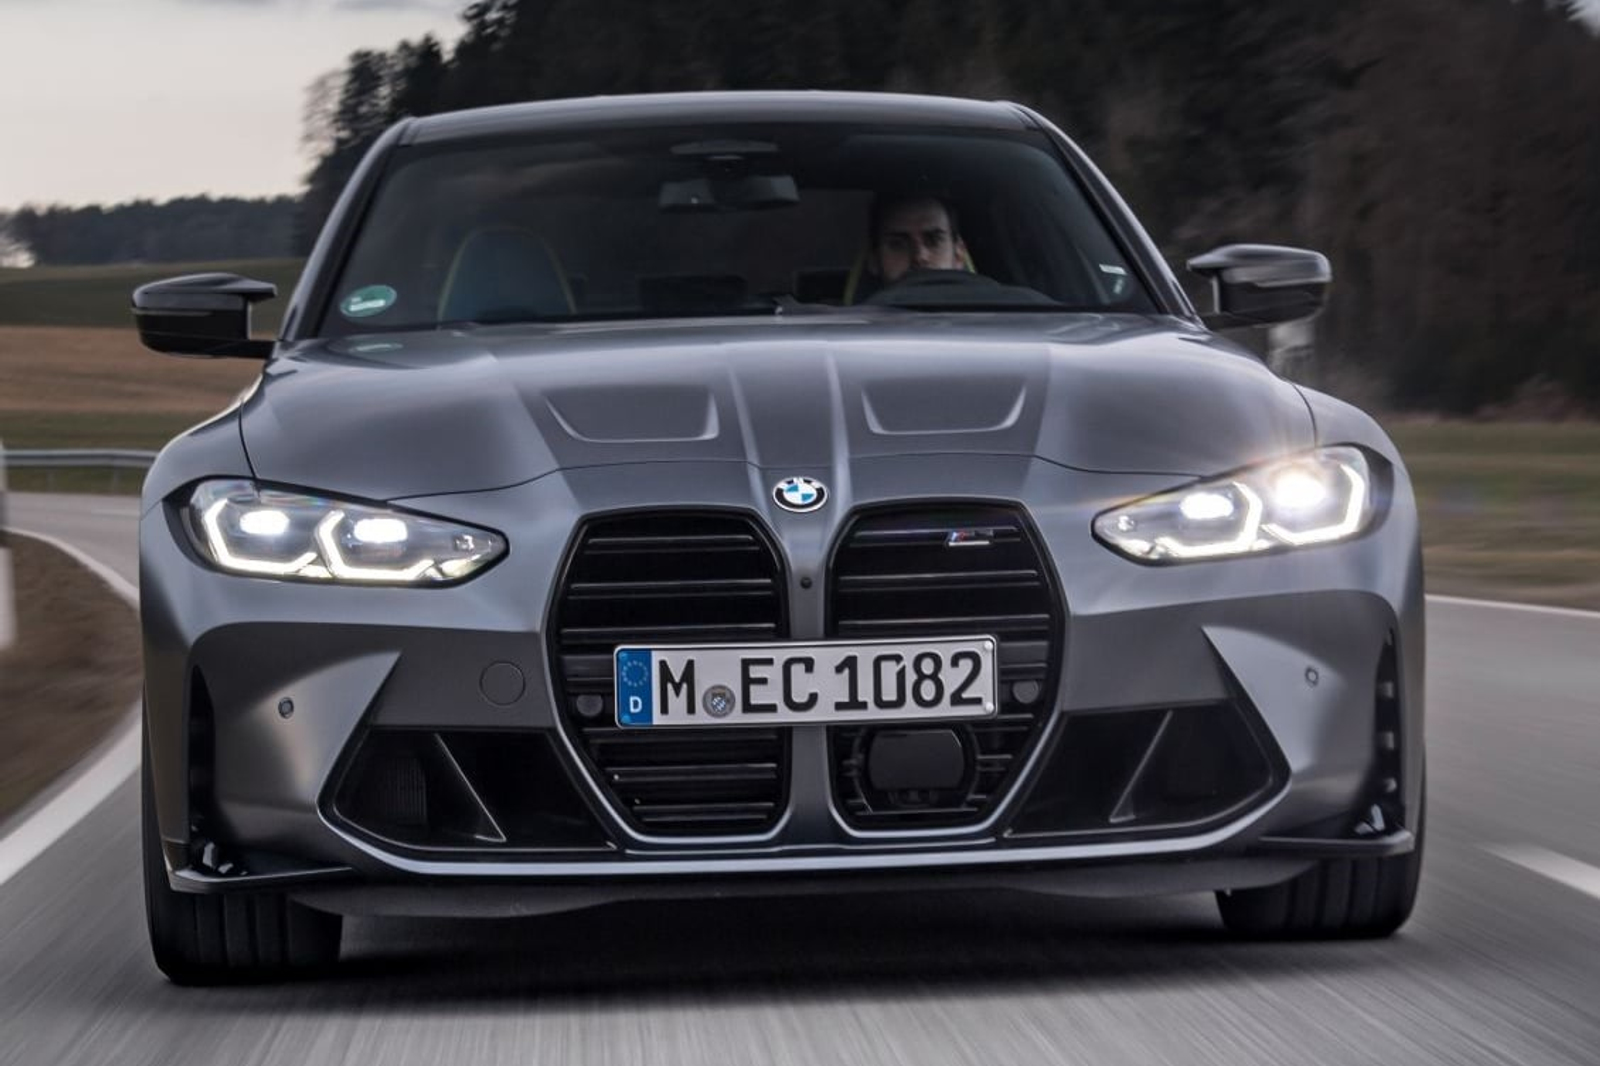 sports cars, luxury, next-gen bmw m3 and m4 may not go electric after all